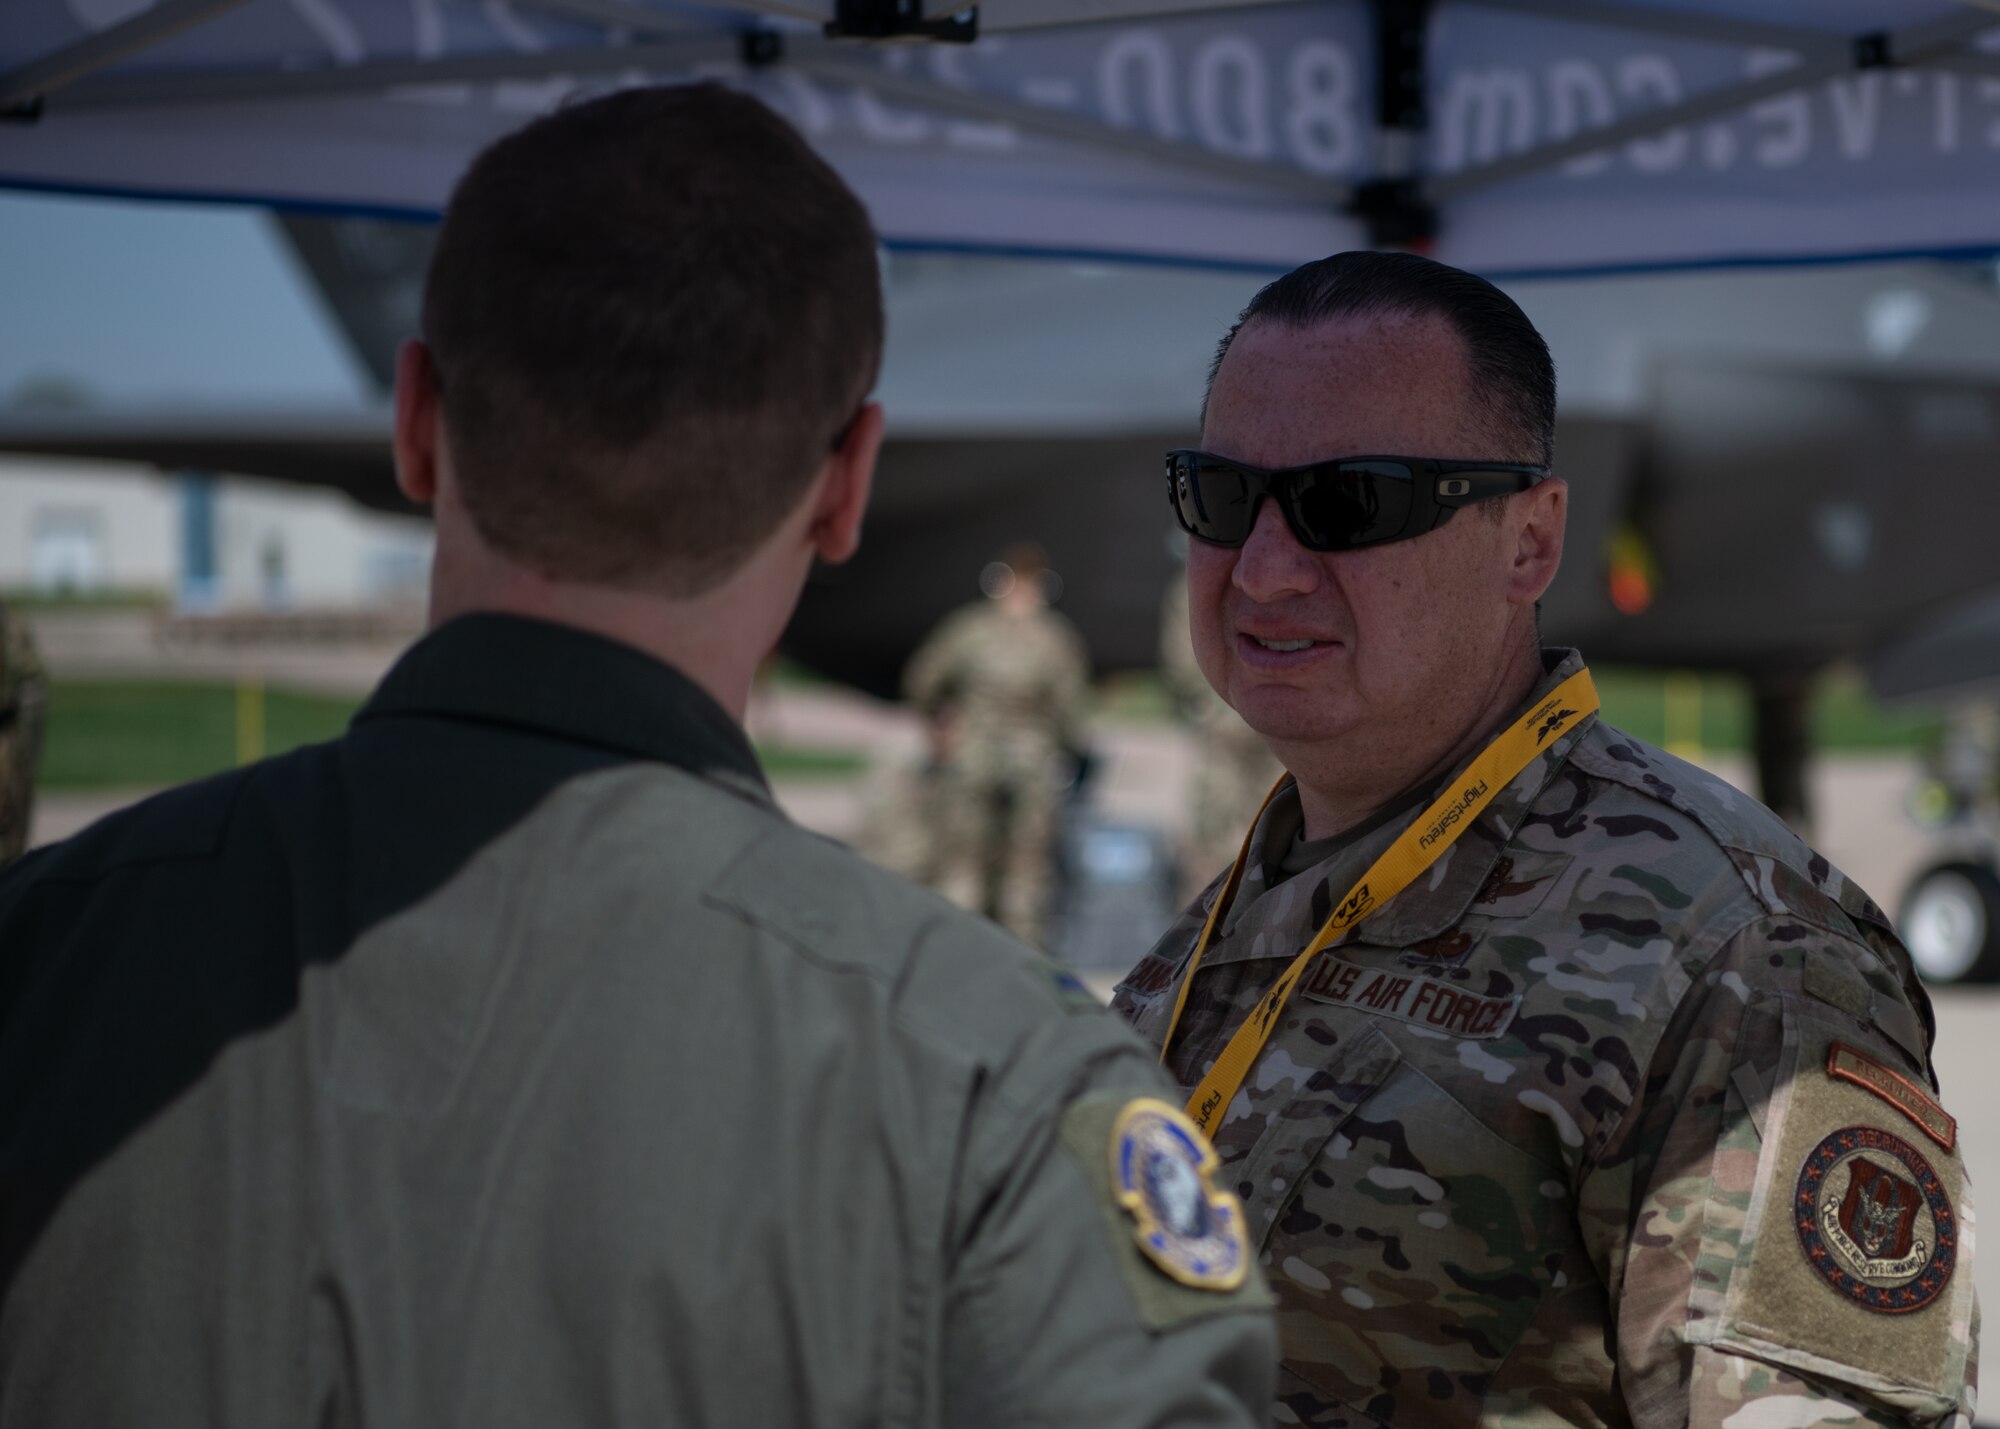 Two Air Force Reserve officers are talking on a flight line